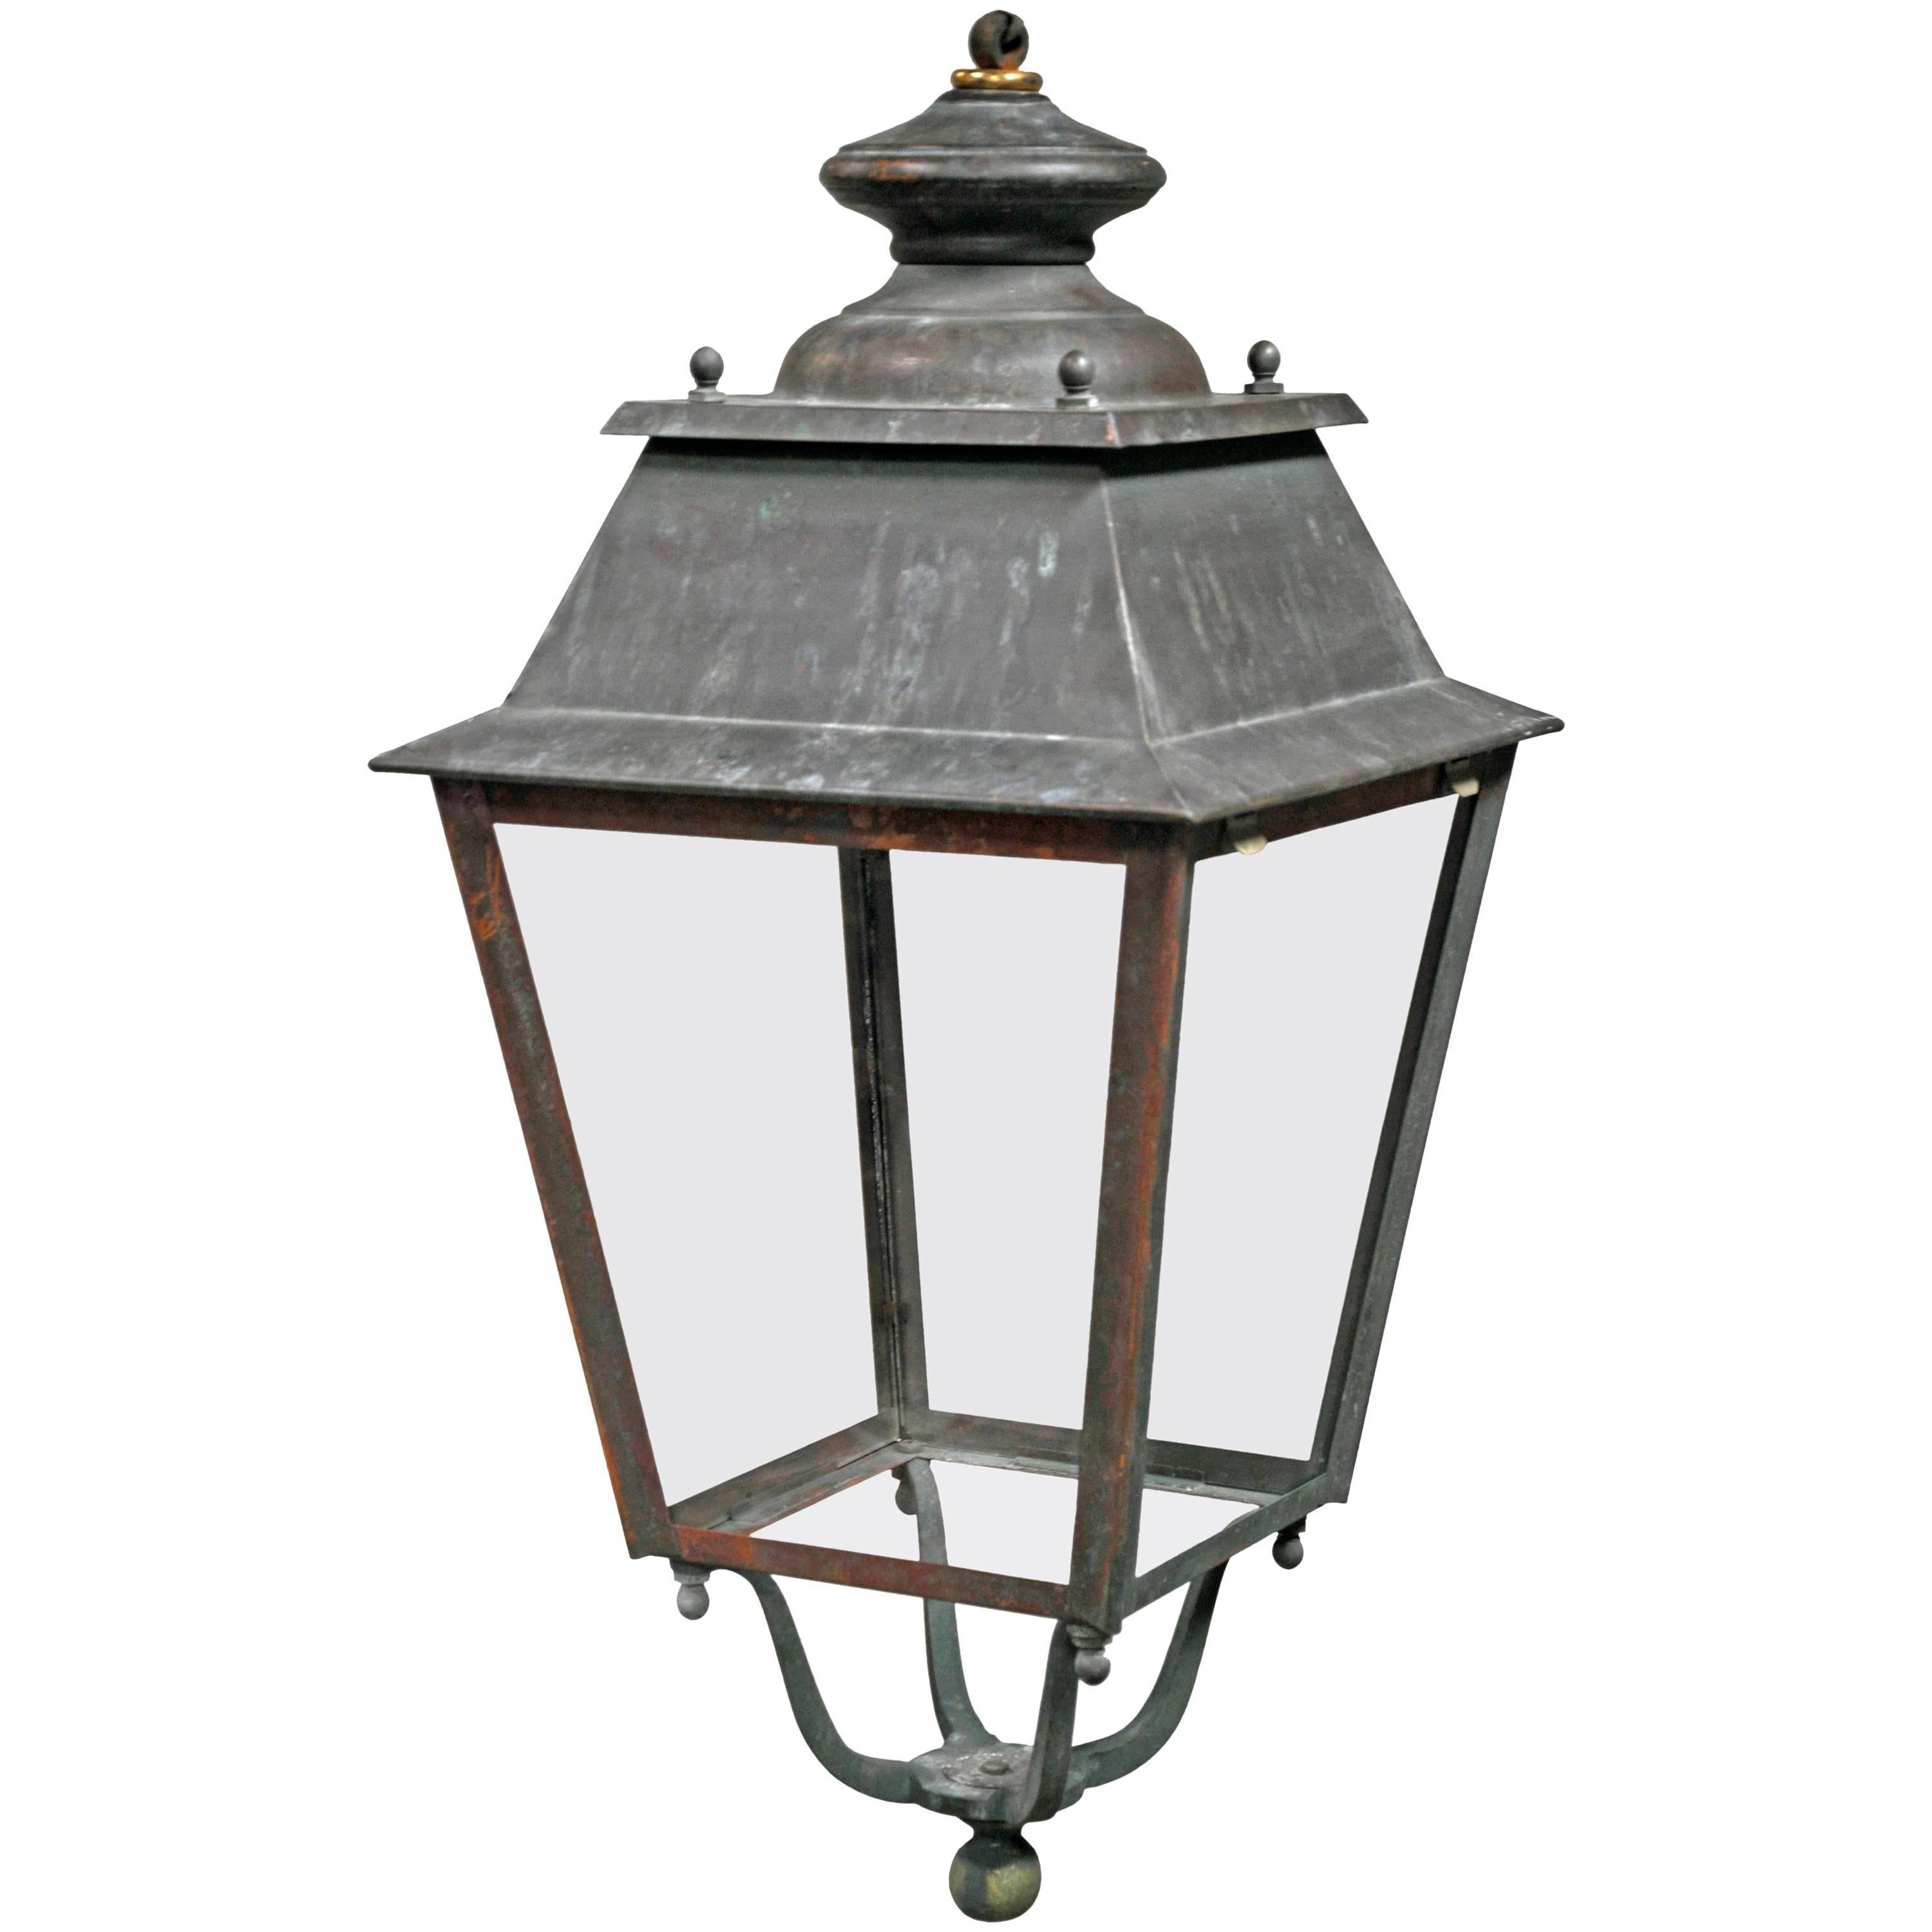 Old French Lantern in Copper and Iron